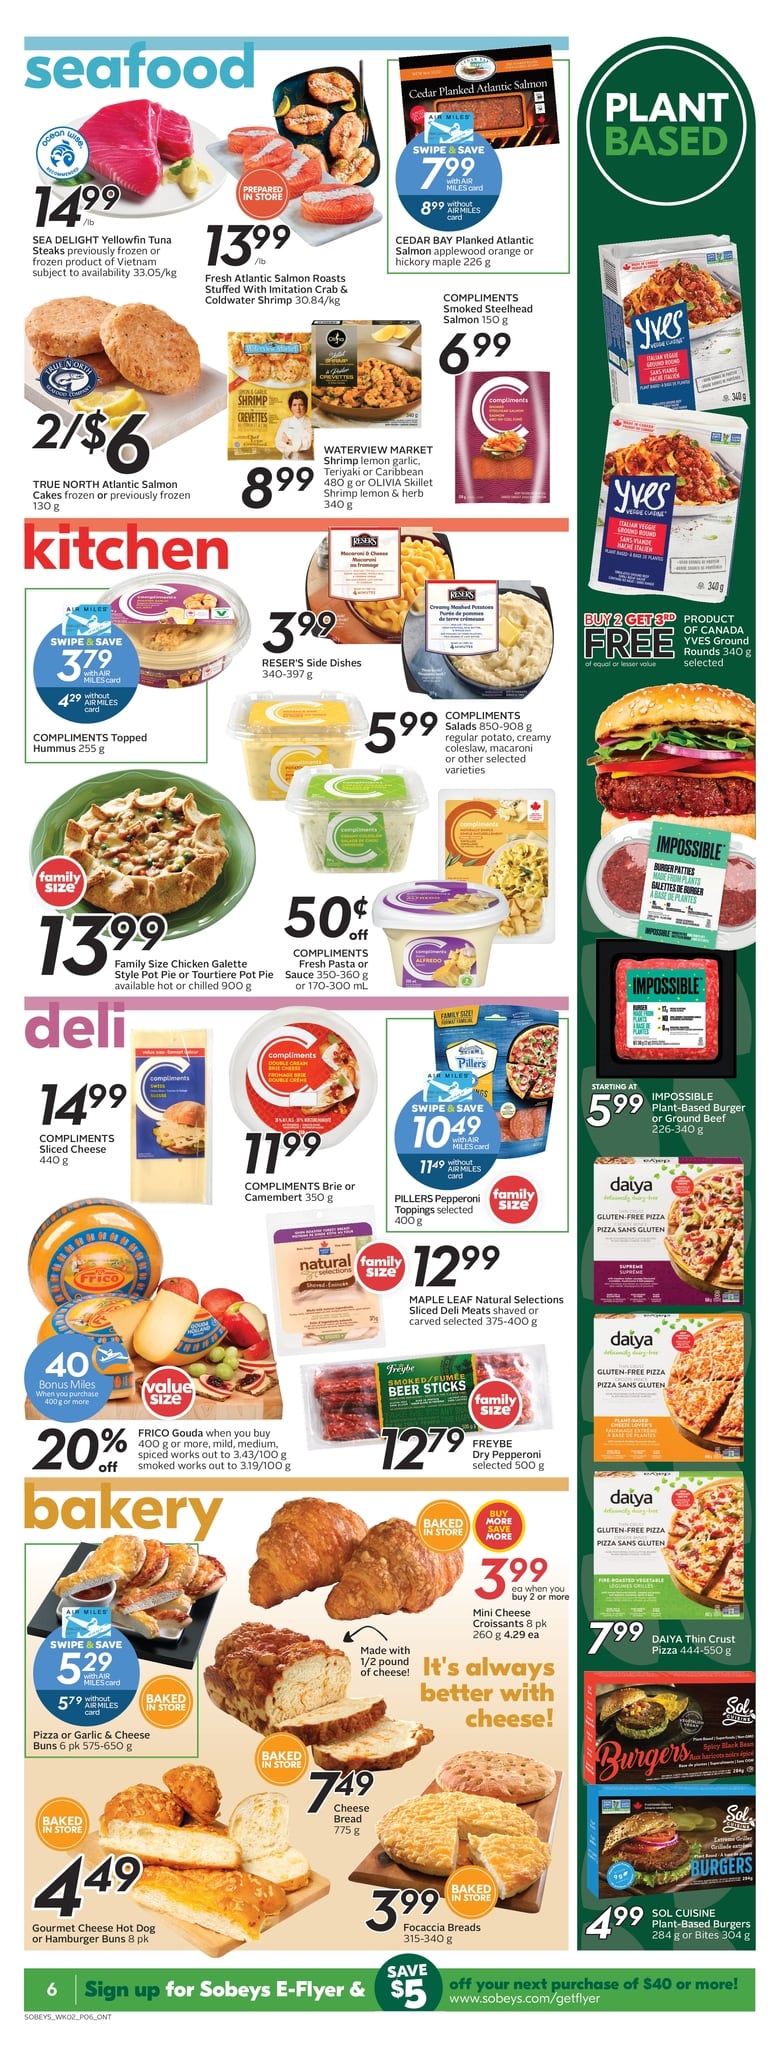 Sobeys - Weekly Flyer Specials - Page 8